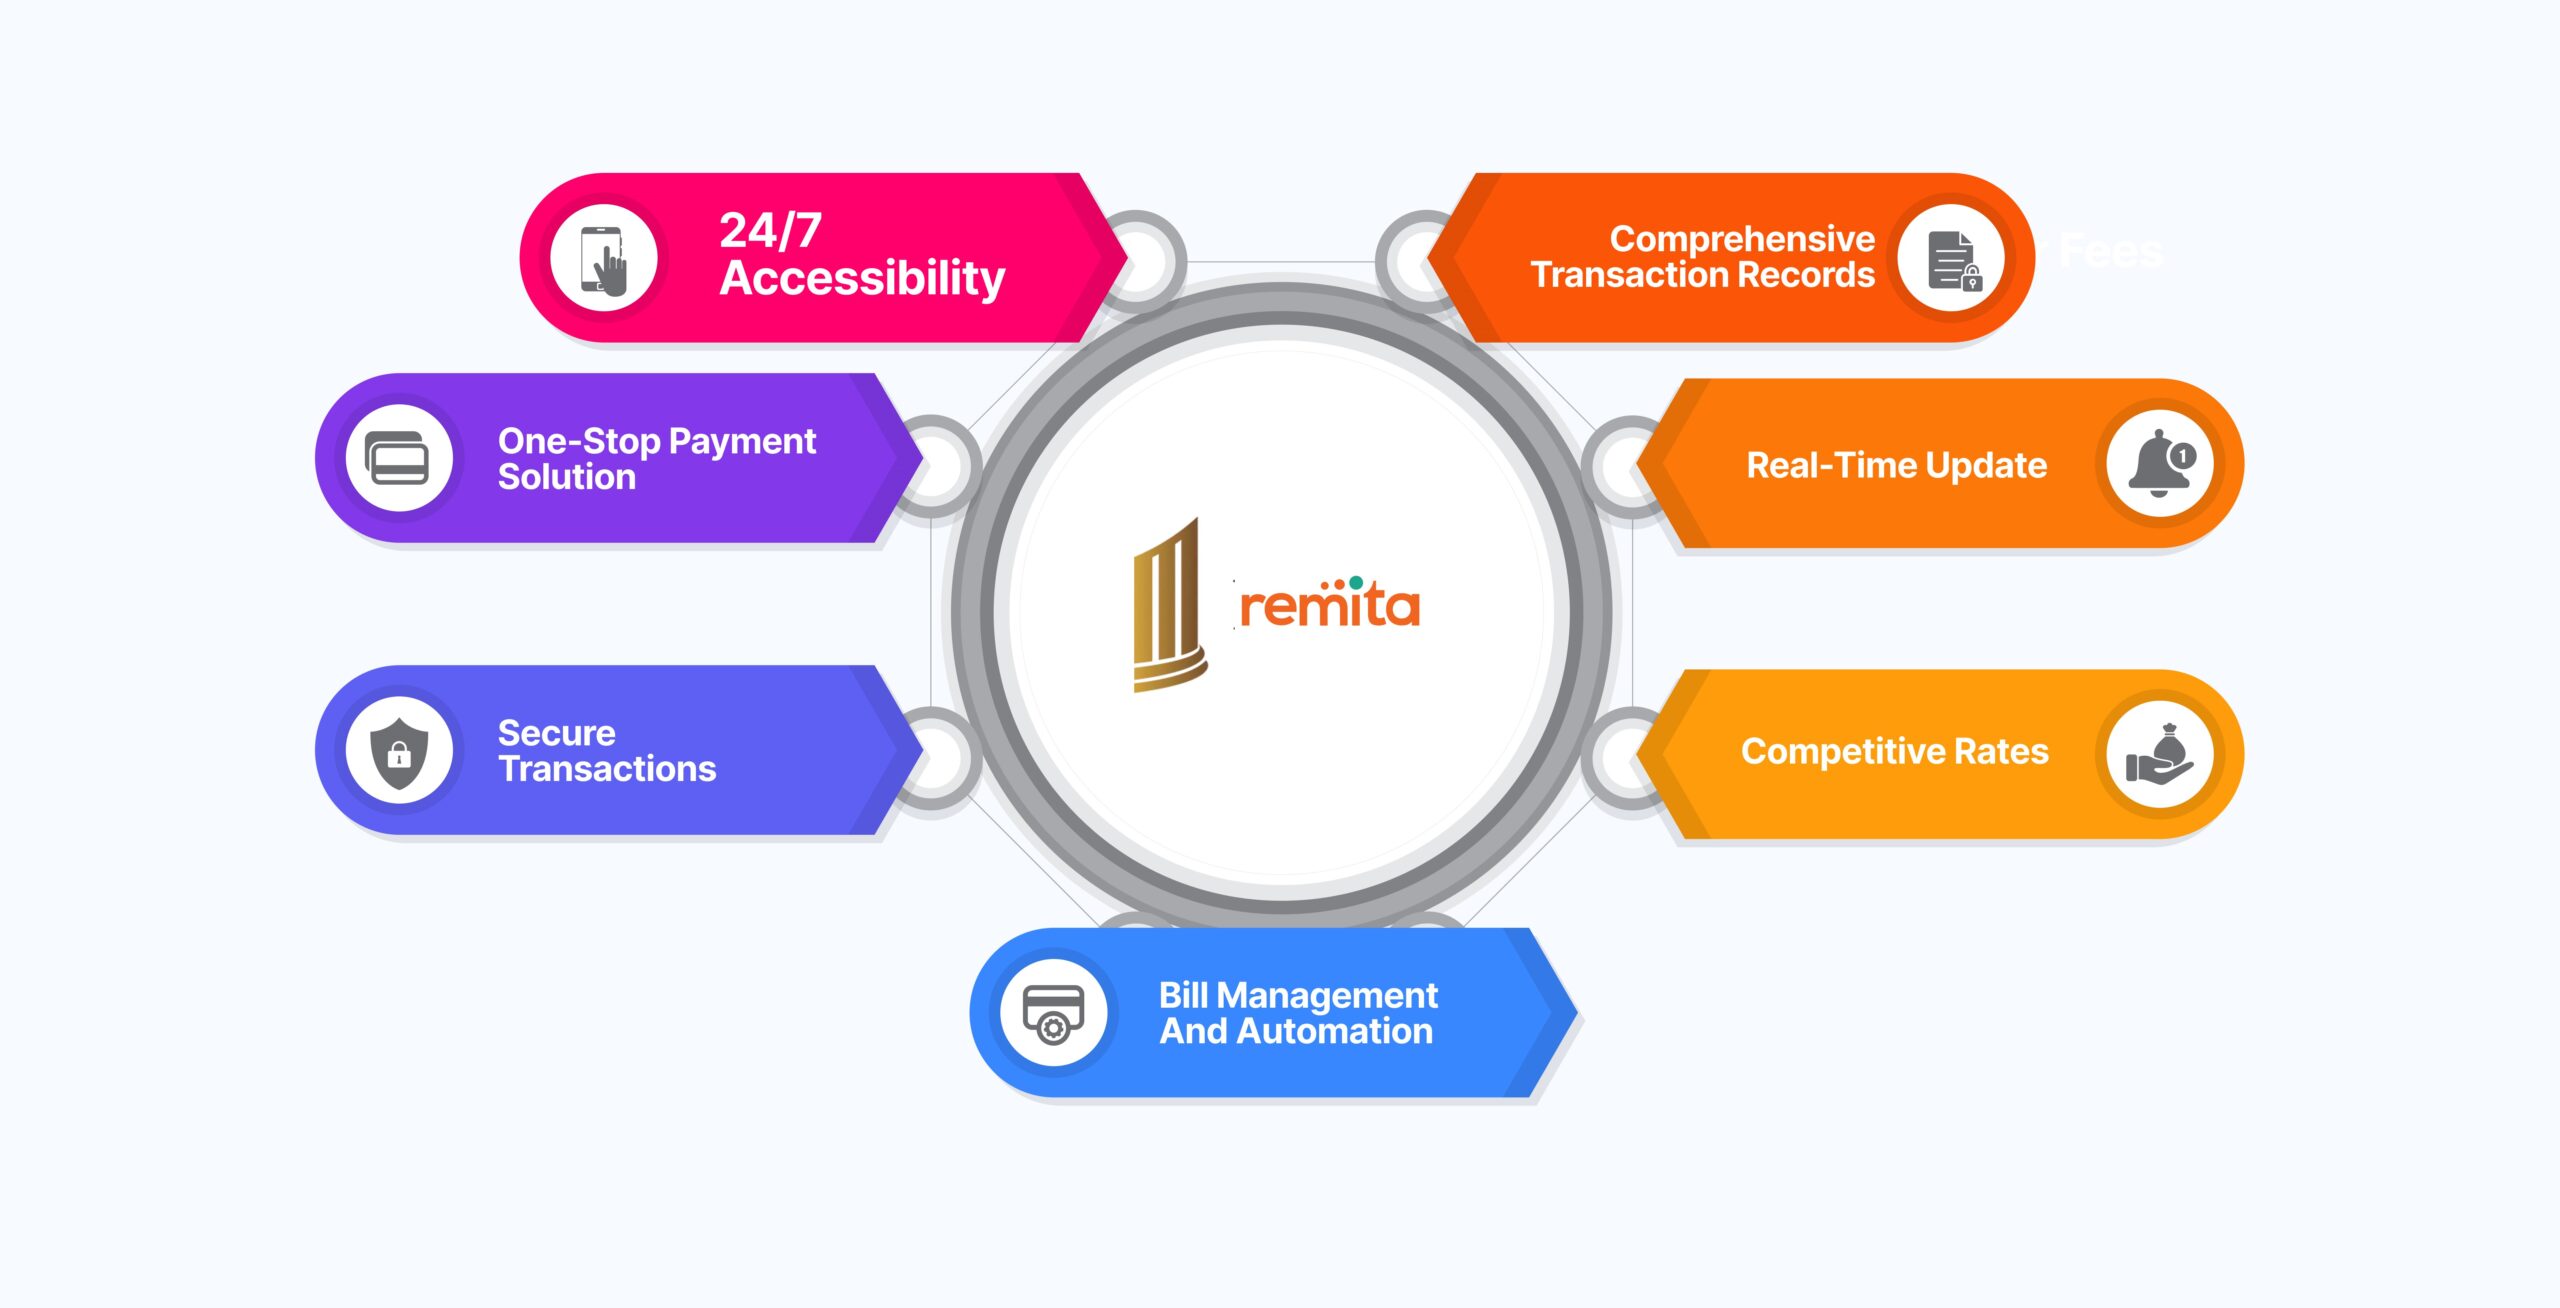 why choose mintyn for remita payment